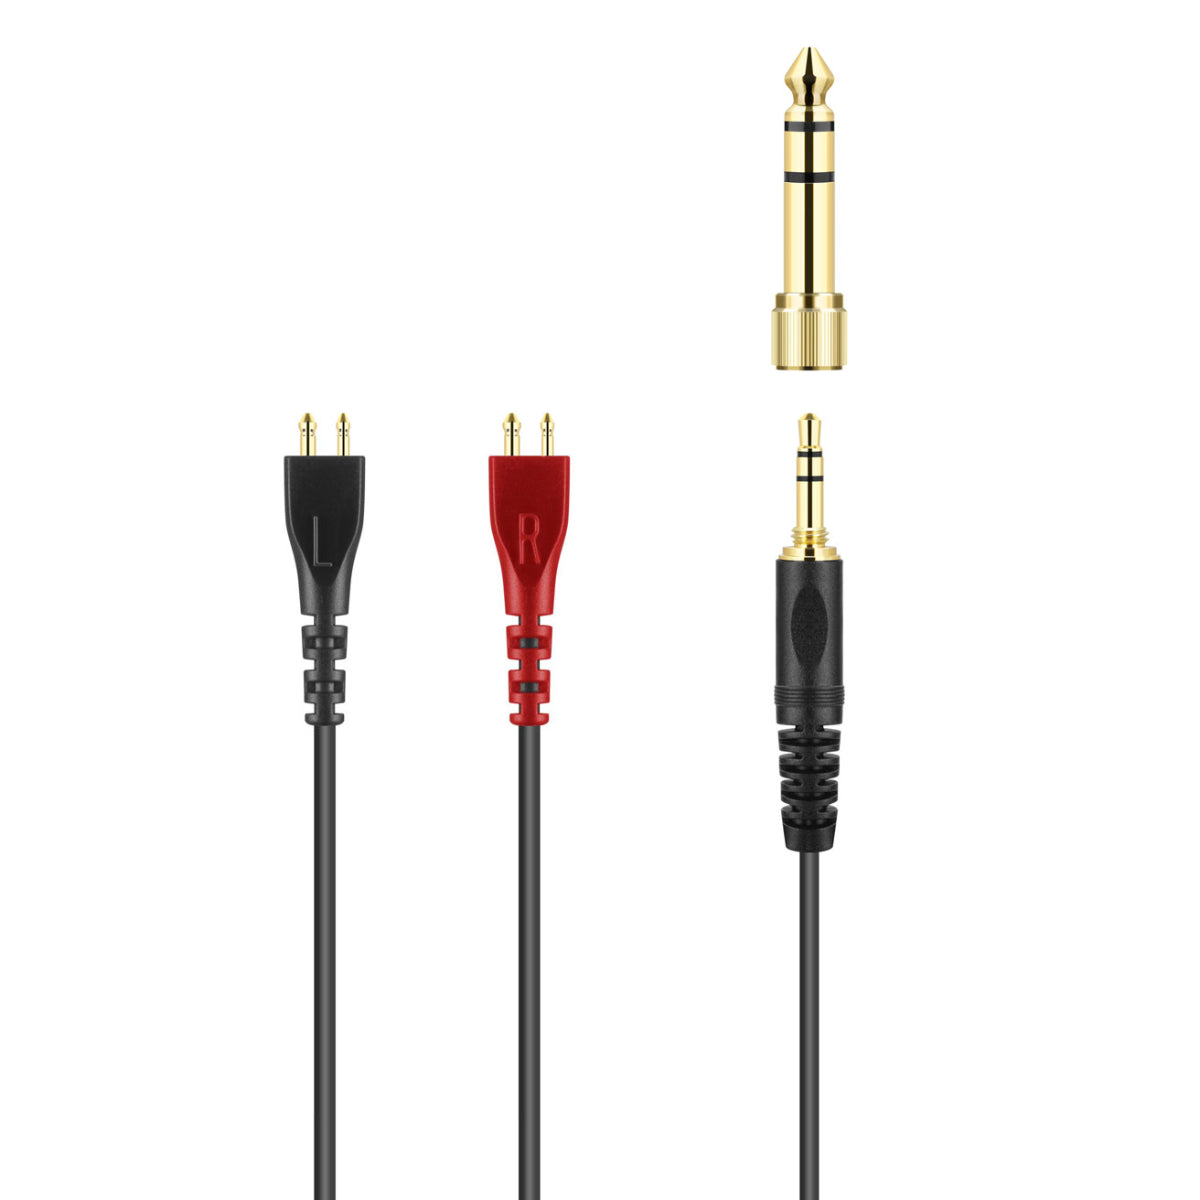 Sennheiser Cable for HD 25 Light, 1.5m Dual-sided, 3.5/6.3mm Jack Adapter